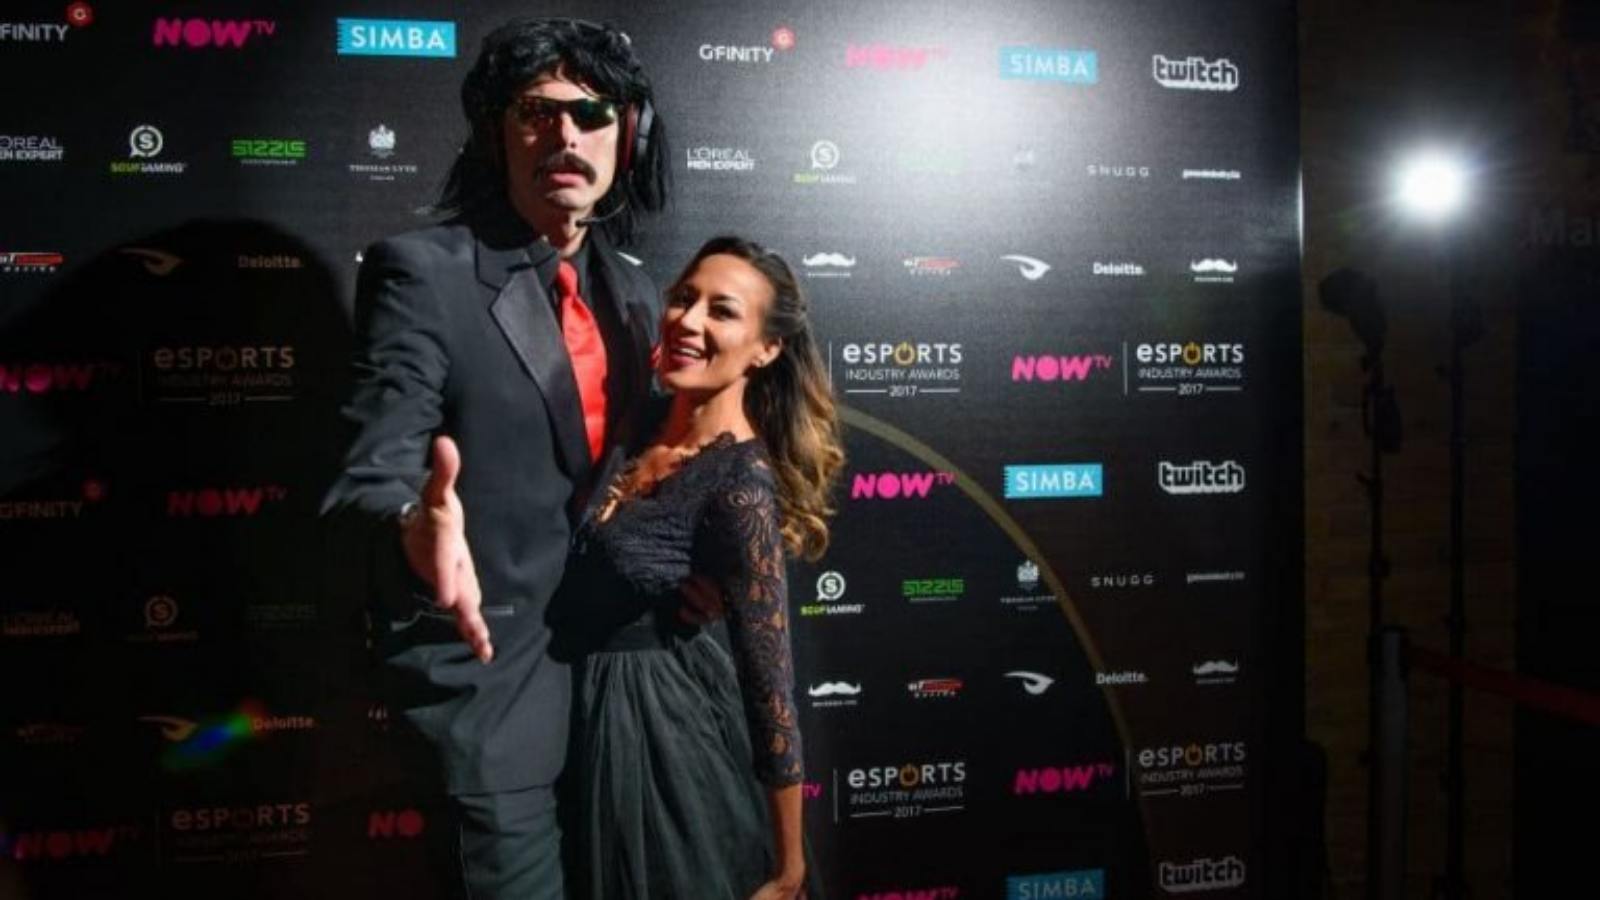 Best of Who did drdisrespect cheat on his wife with